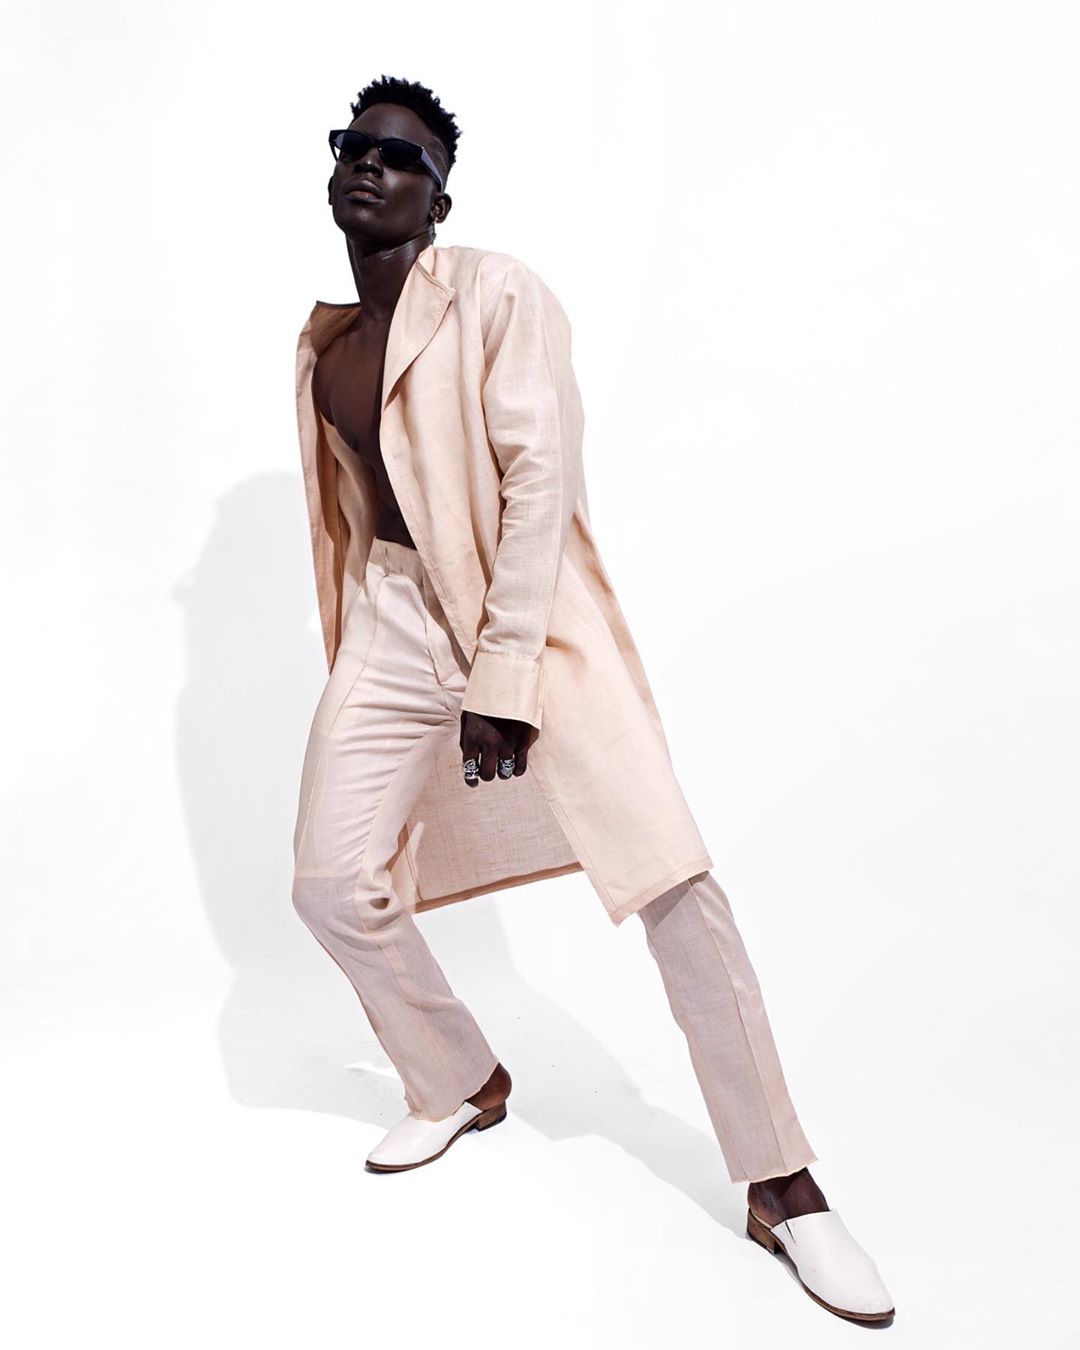 The TJWHO UNIVERSE CRUISE 2020 Collection Is A Study in Modern African Menswear